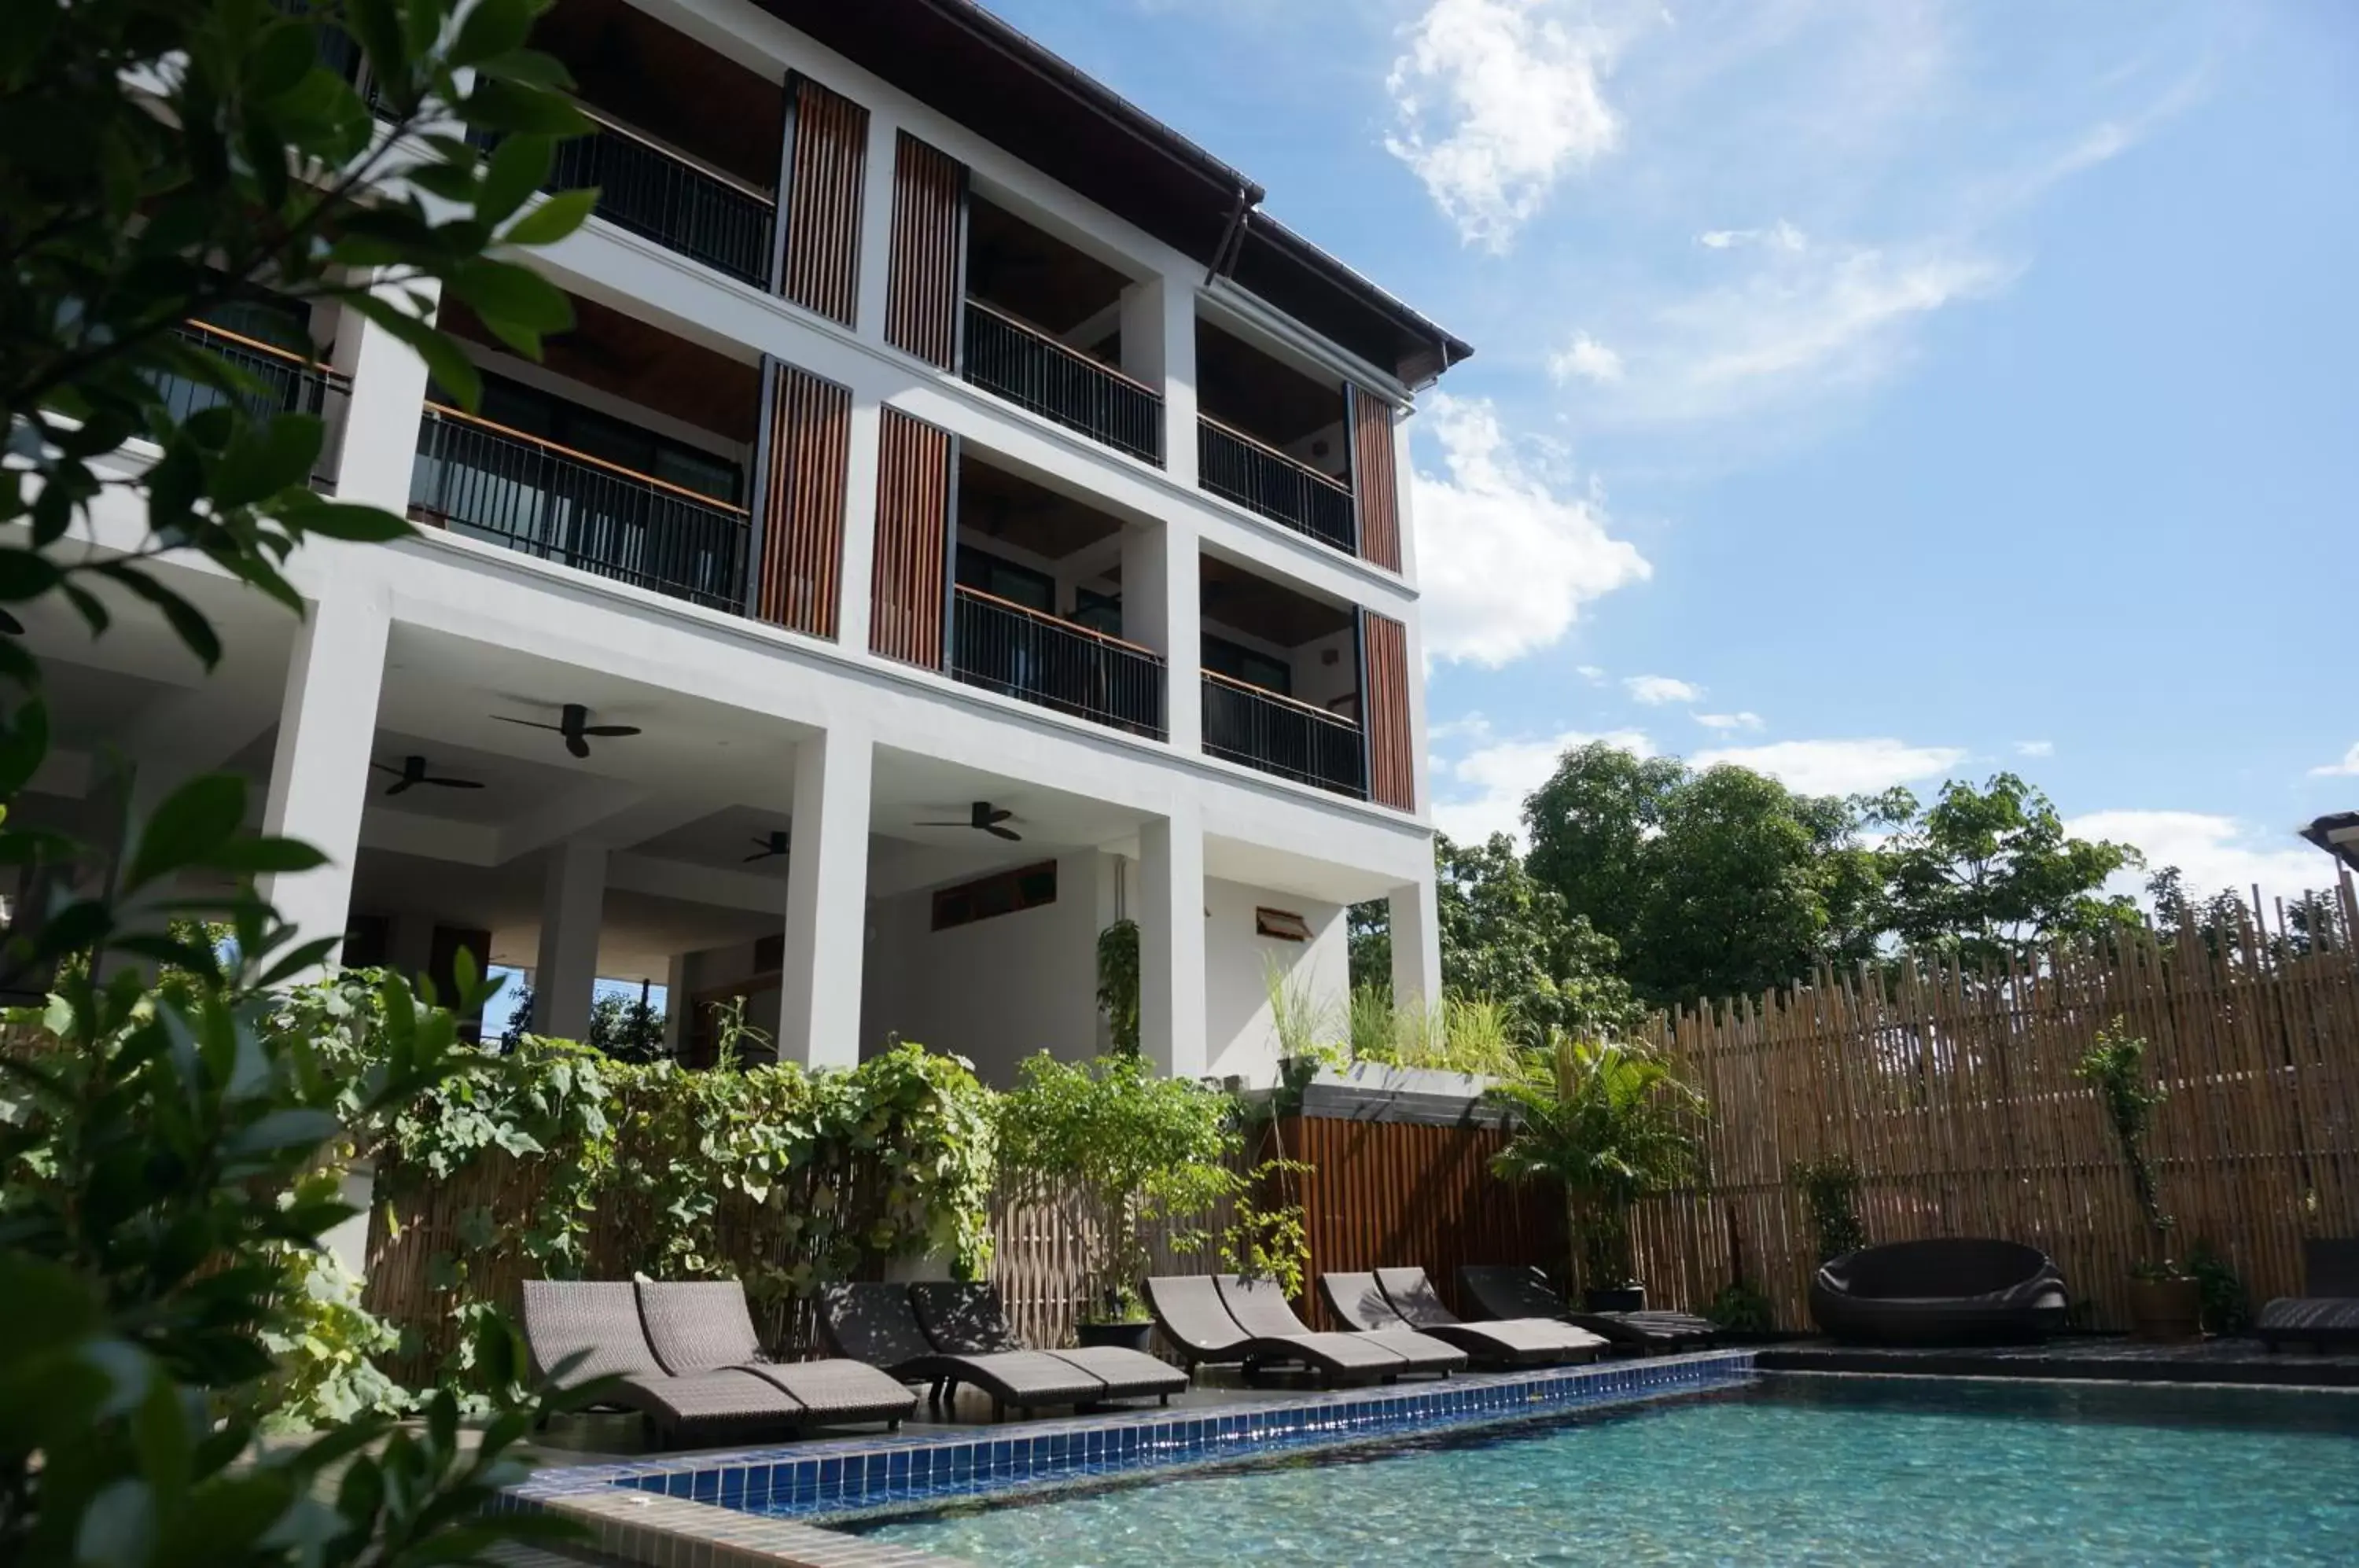 Property Building in SugarCane Chiang Mai